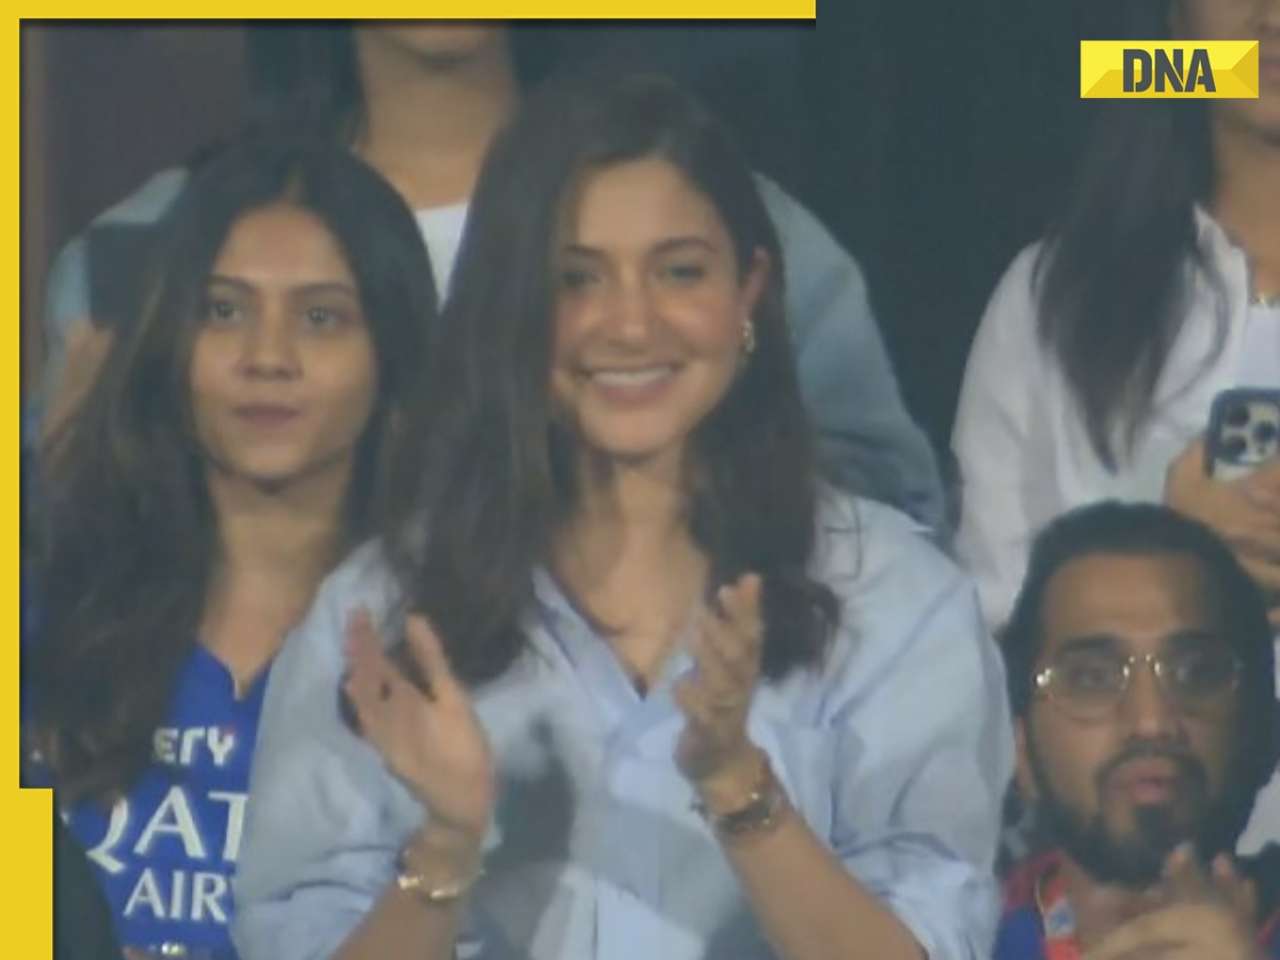 Anushka Sharma cheers for Virat Kohli's RCB in her first public appearance after son Akaay's birth, photos go viral